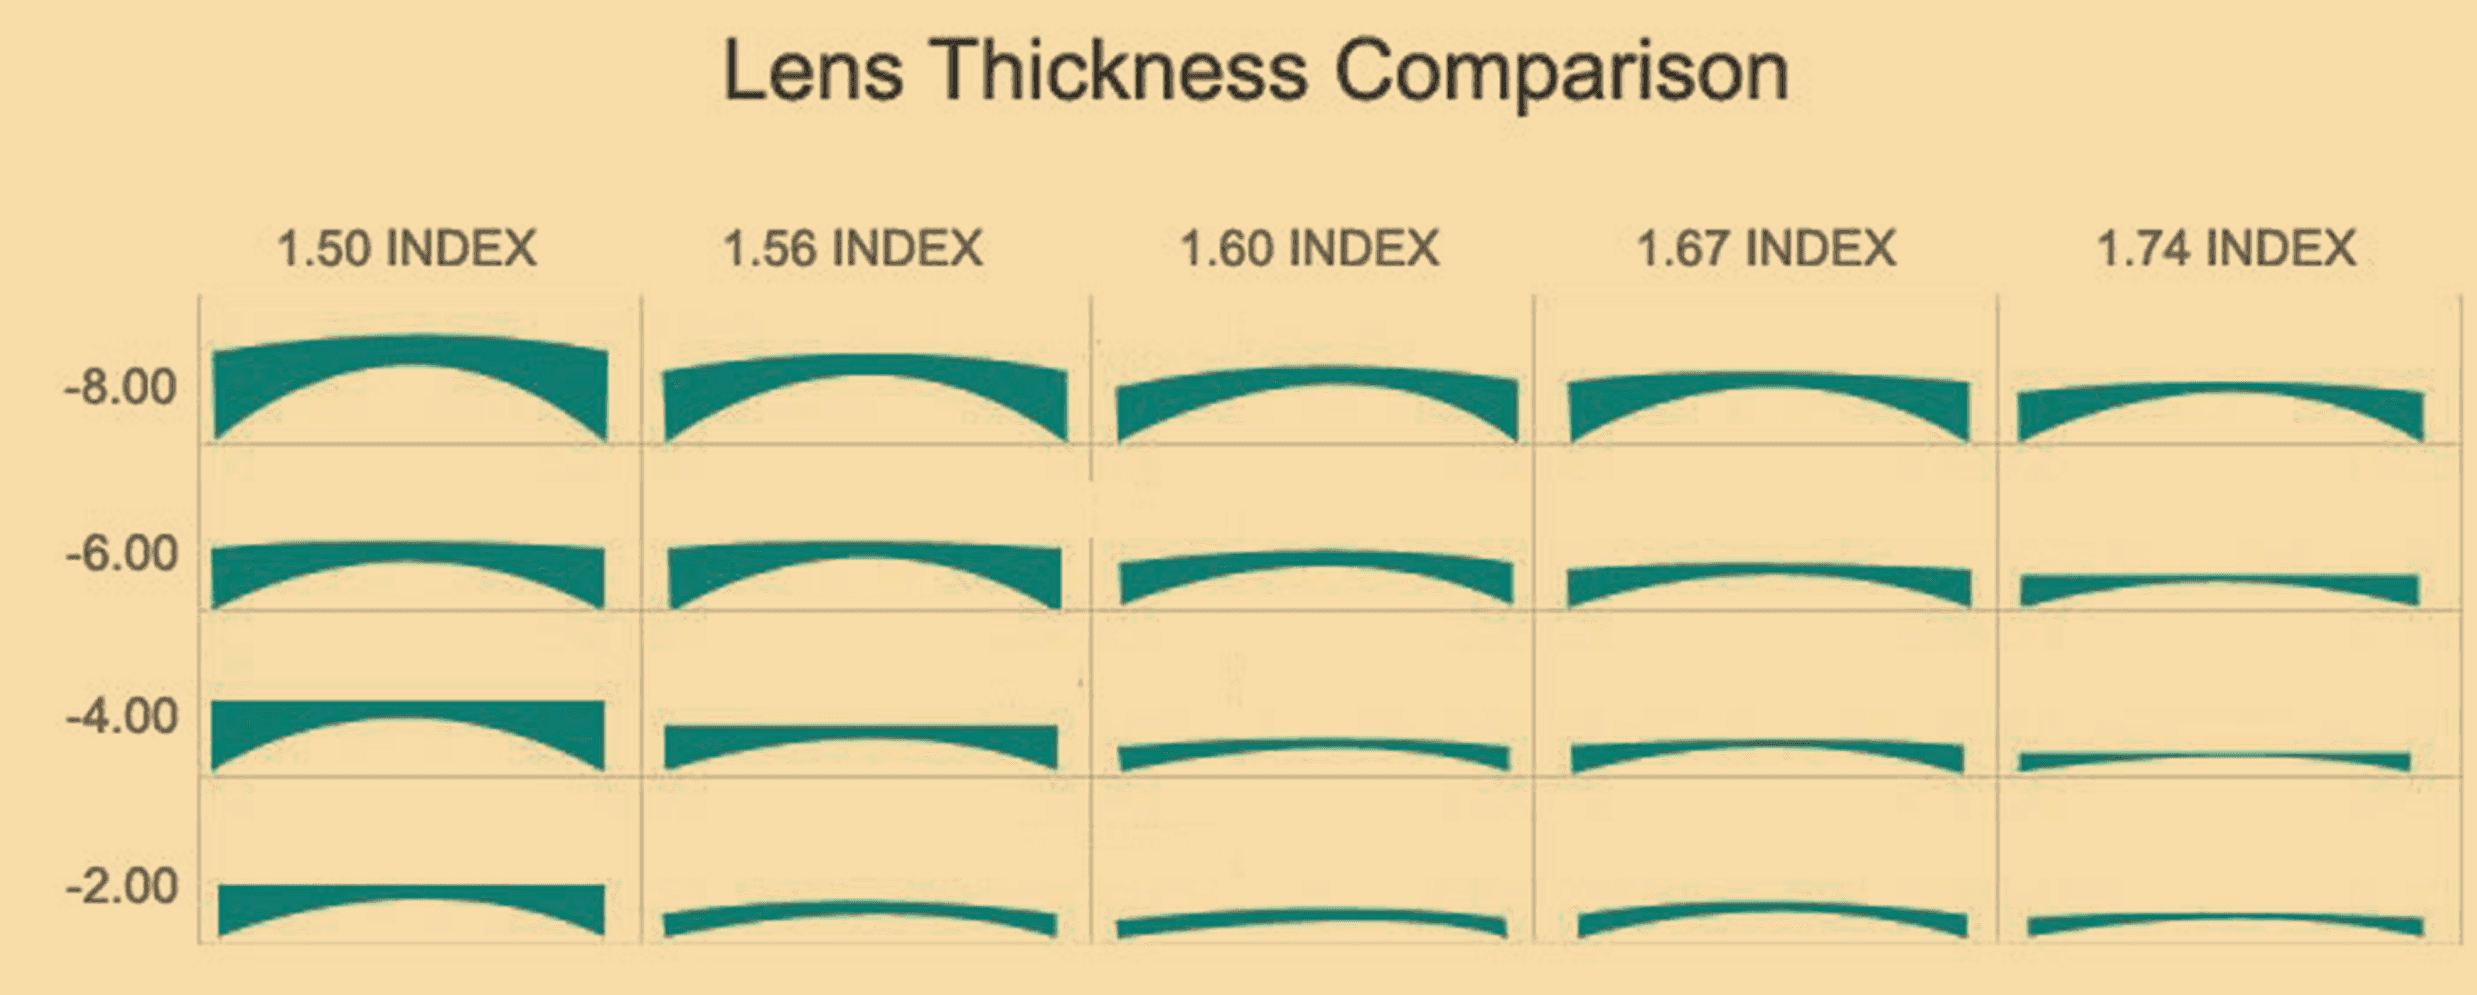 A chart comparing lens thickness between various materials